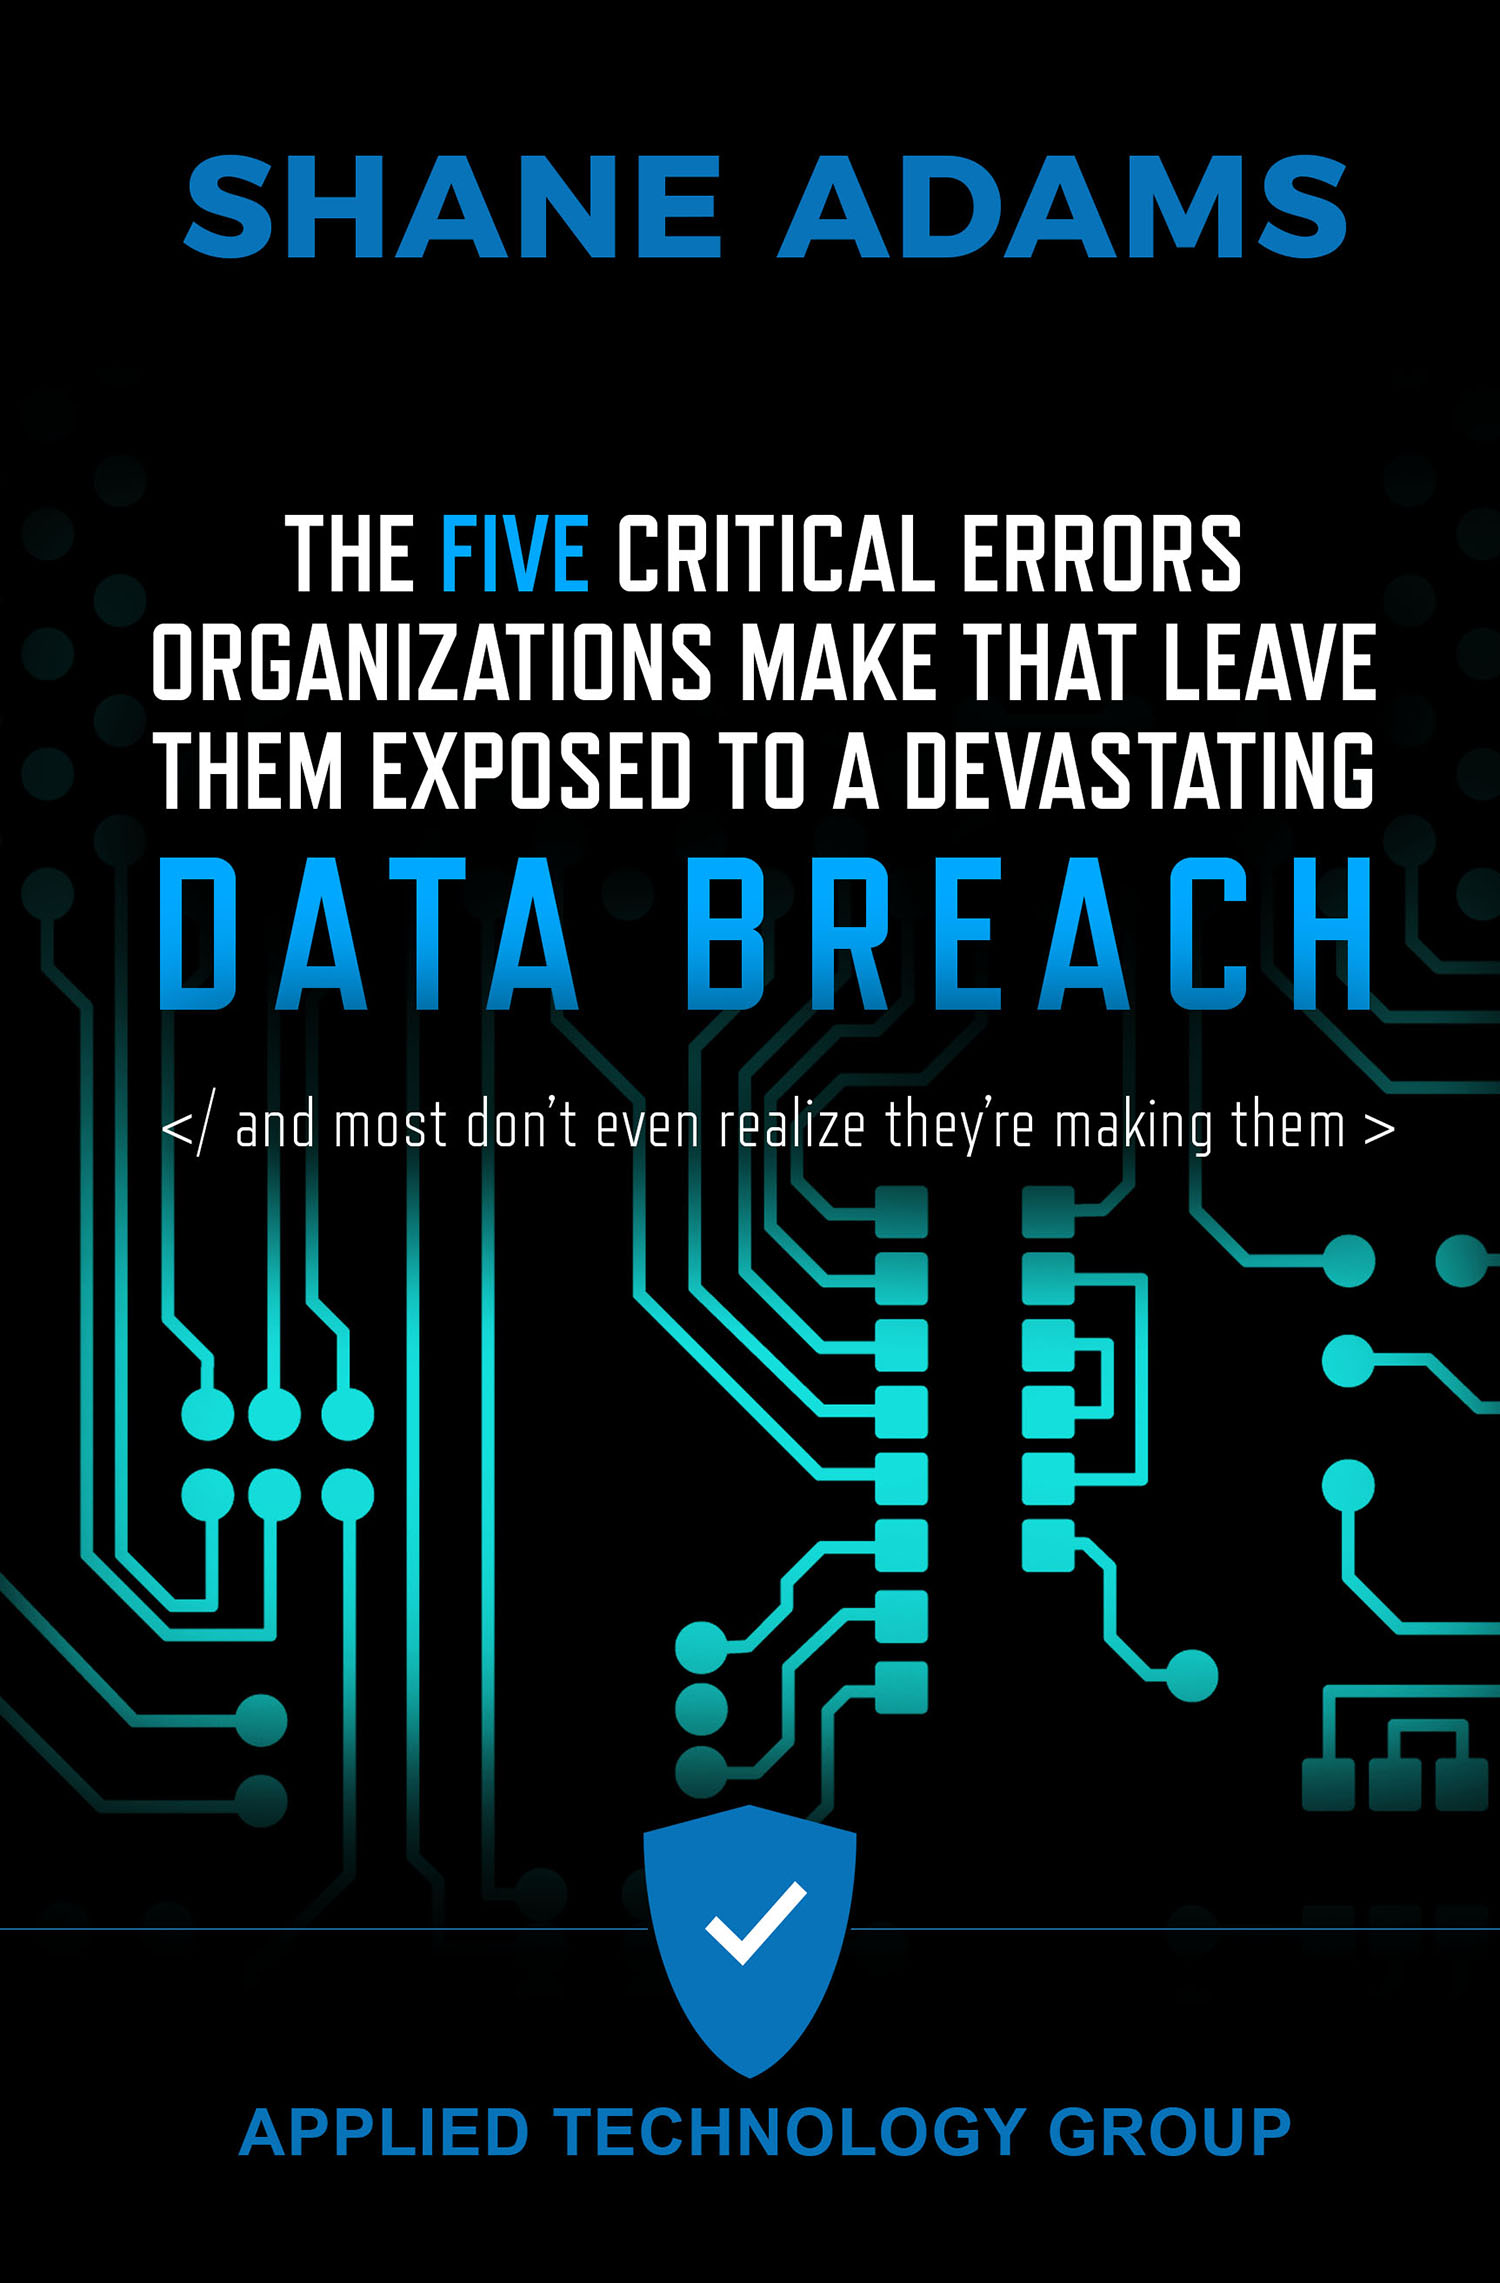 A simple cover with the title The Five Critical Errors Organizations Make That Leave Them Exposed To A Devastating Data Breach in the middle. Below that are the words AND MOST DON'T REALIZE THEY'RE MAKING THEM written between a closing code line. At the bottom is a simple blue shield logo and the words APPLIED TECHNOLOGY GROUP. At the top in large, bold letters is the author's name SHANE ADAMS. The image on the cover is an illustration of a computer chip. Everything is surrounded in black.